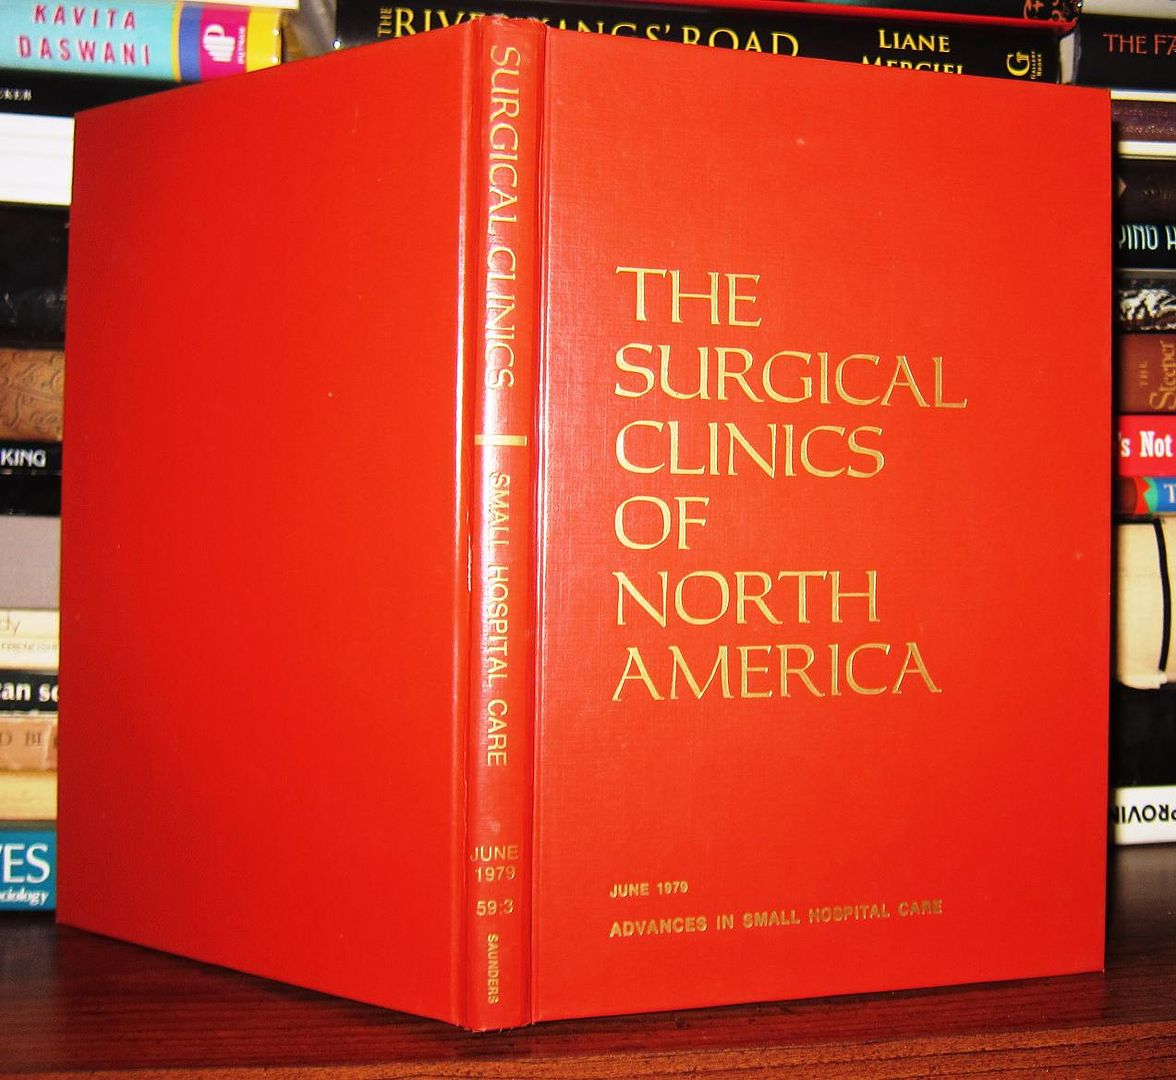 ABERNATHY, CHARLES - The Surgical Clinics of North America Volume 59, Number 3, June 1979: Advances in Small Hospital Care